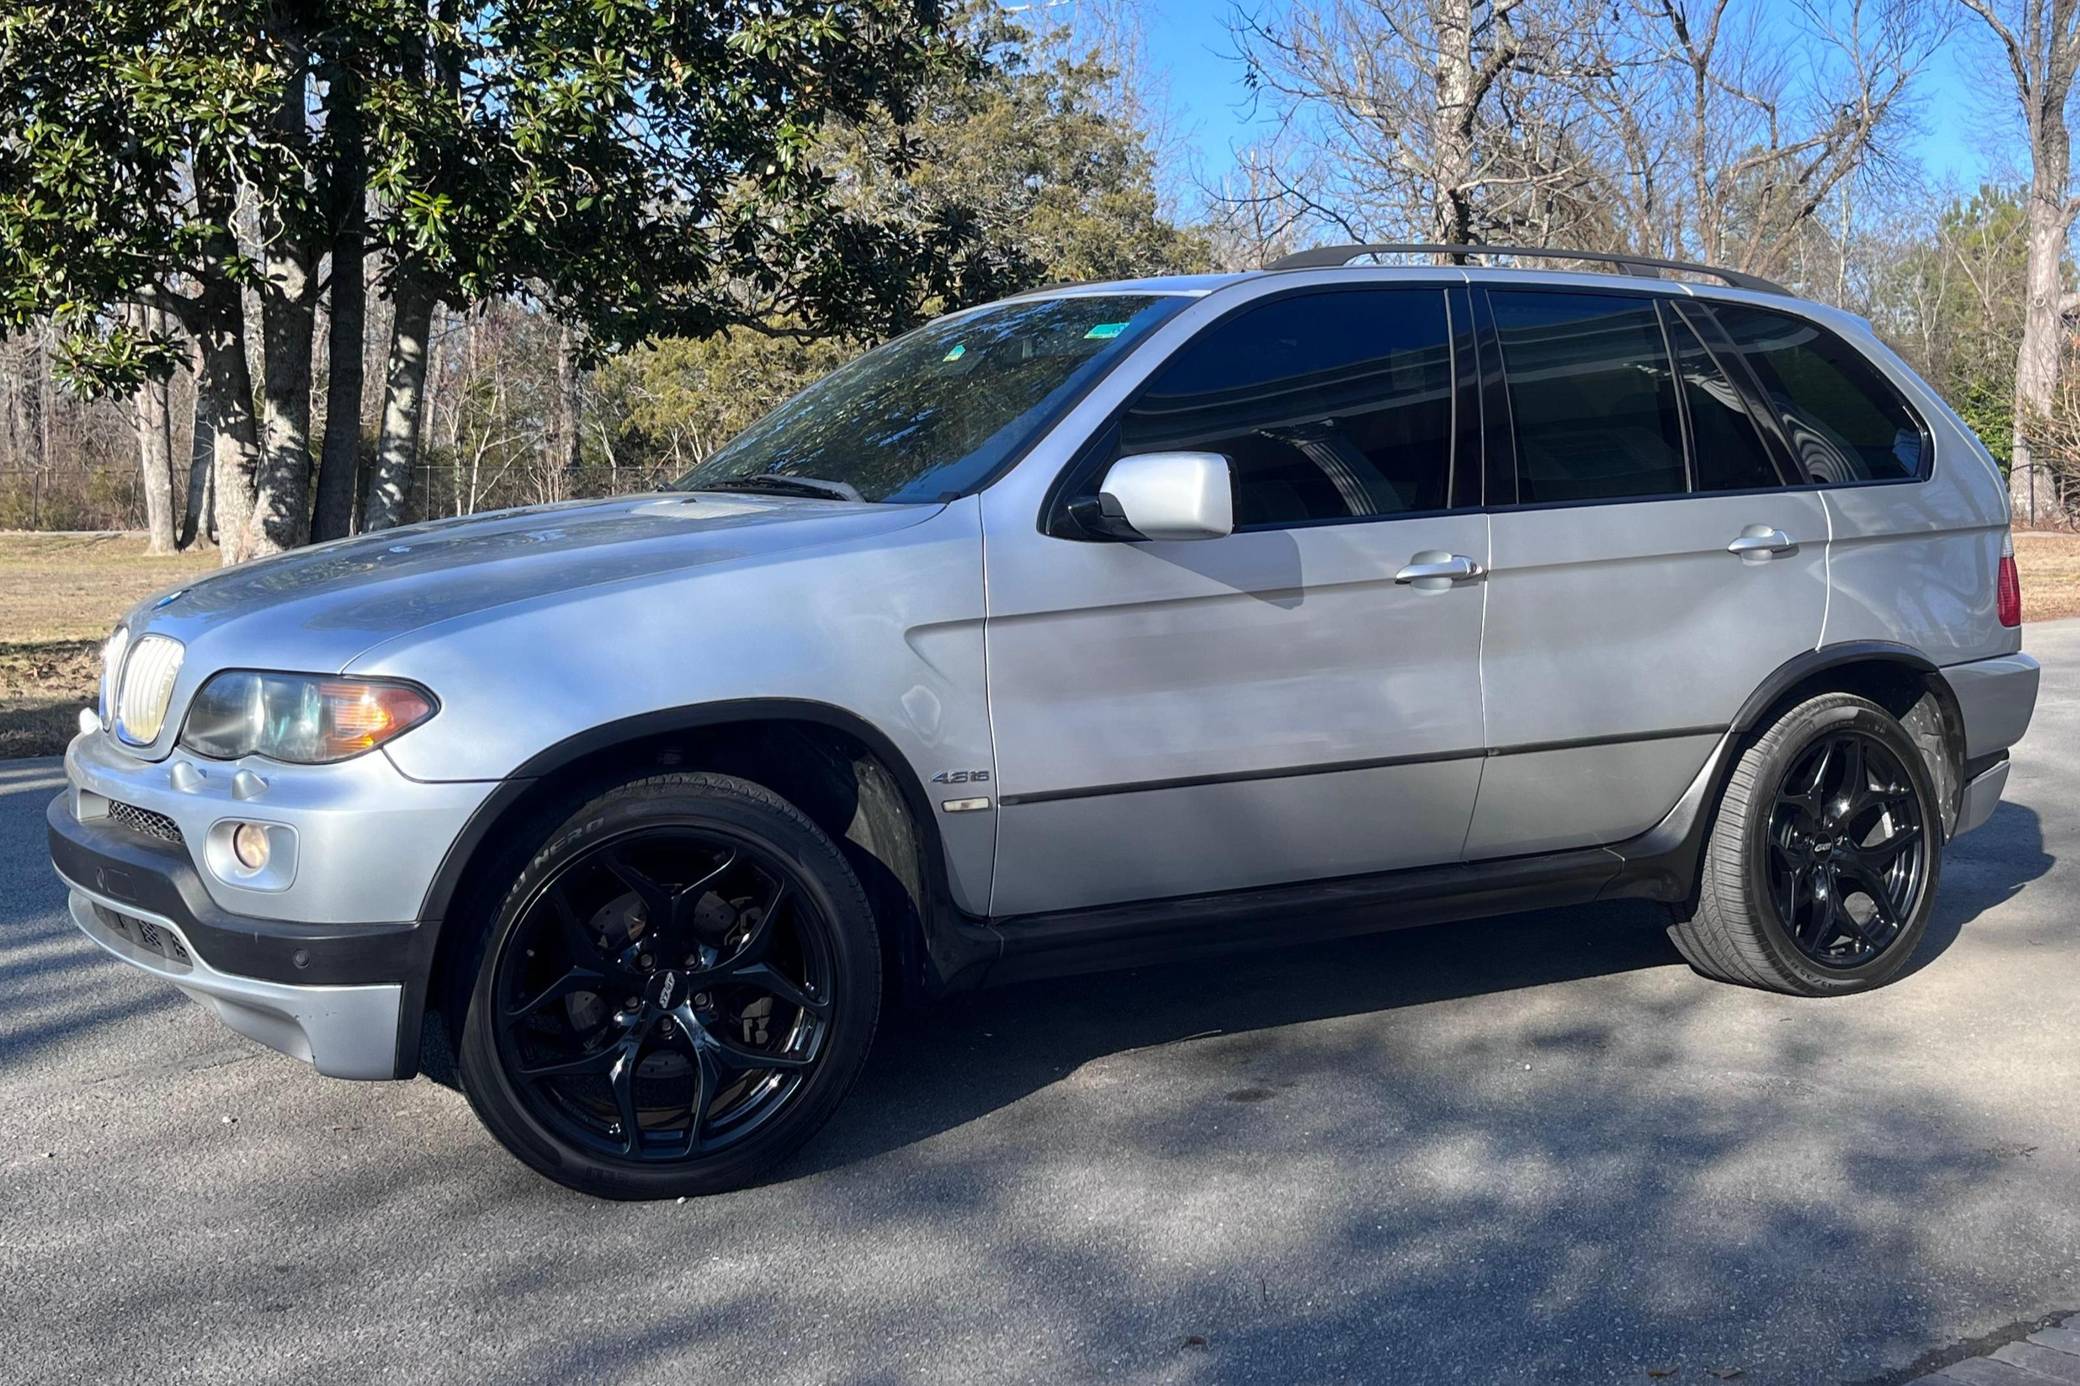 2004 BMW X5 4.8is for Sale - Cars & Bids